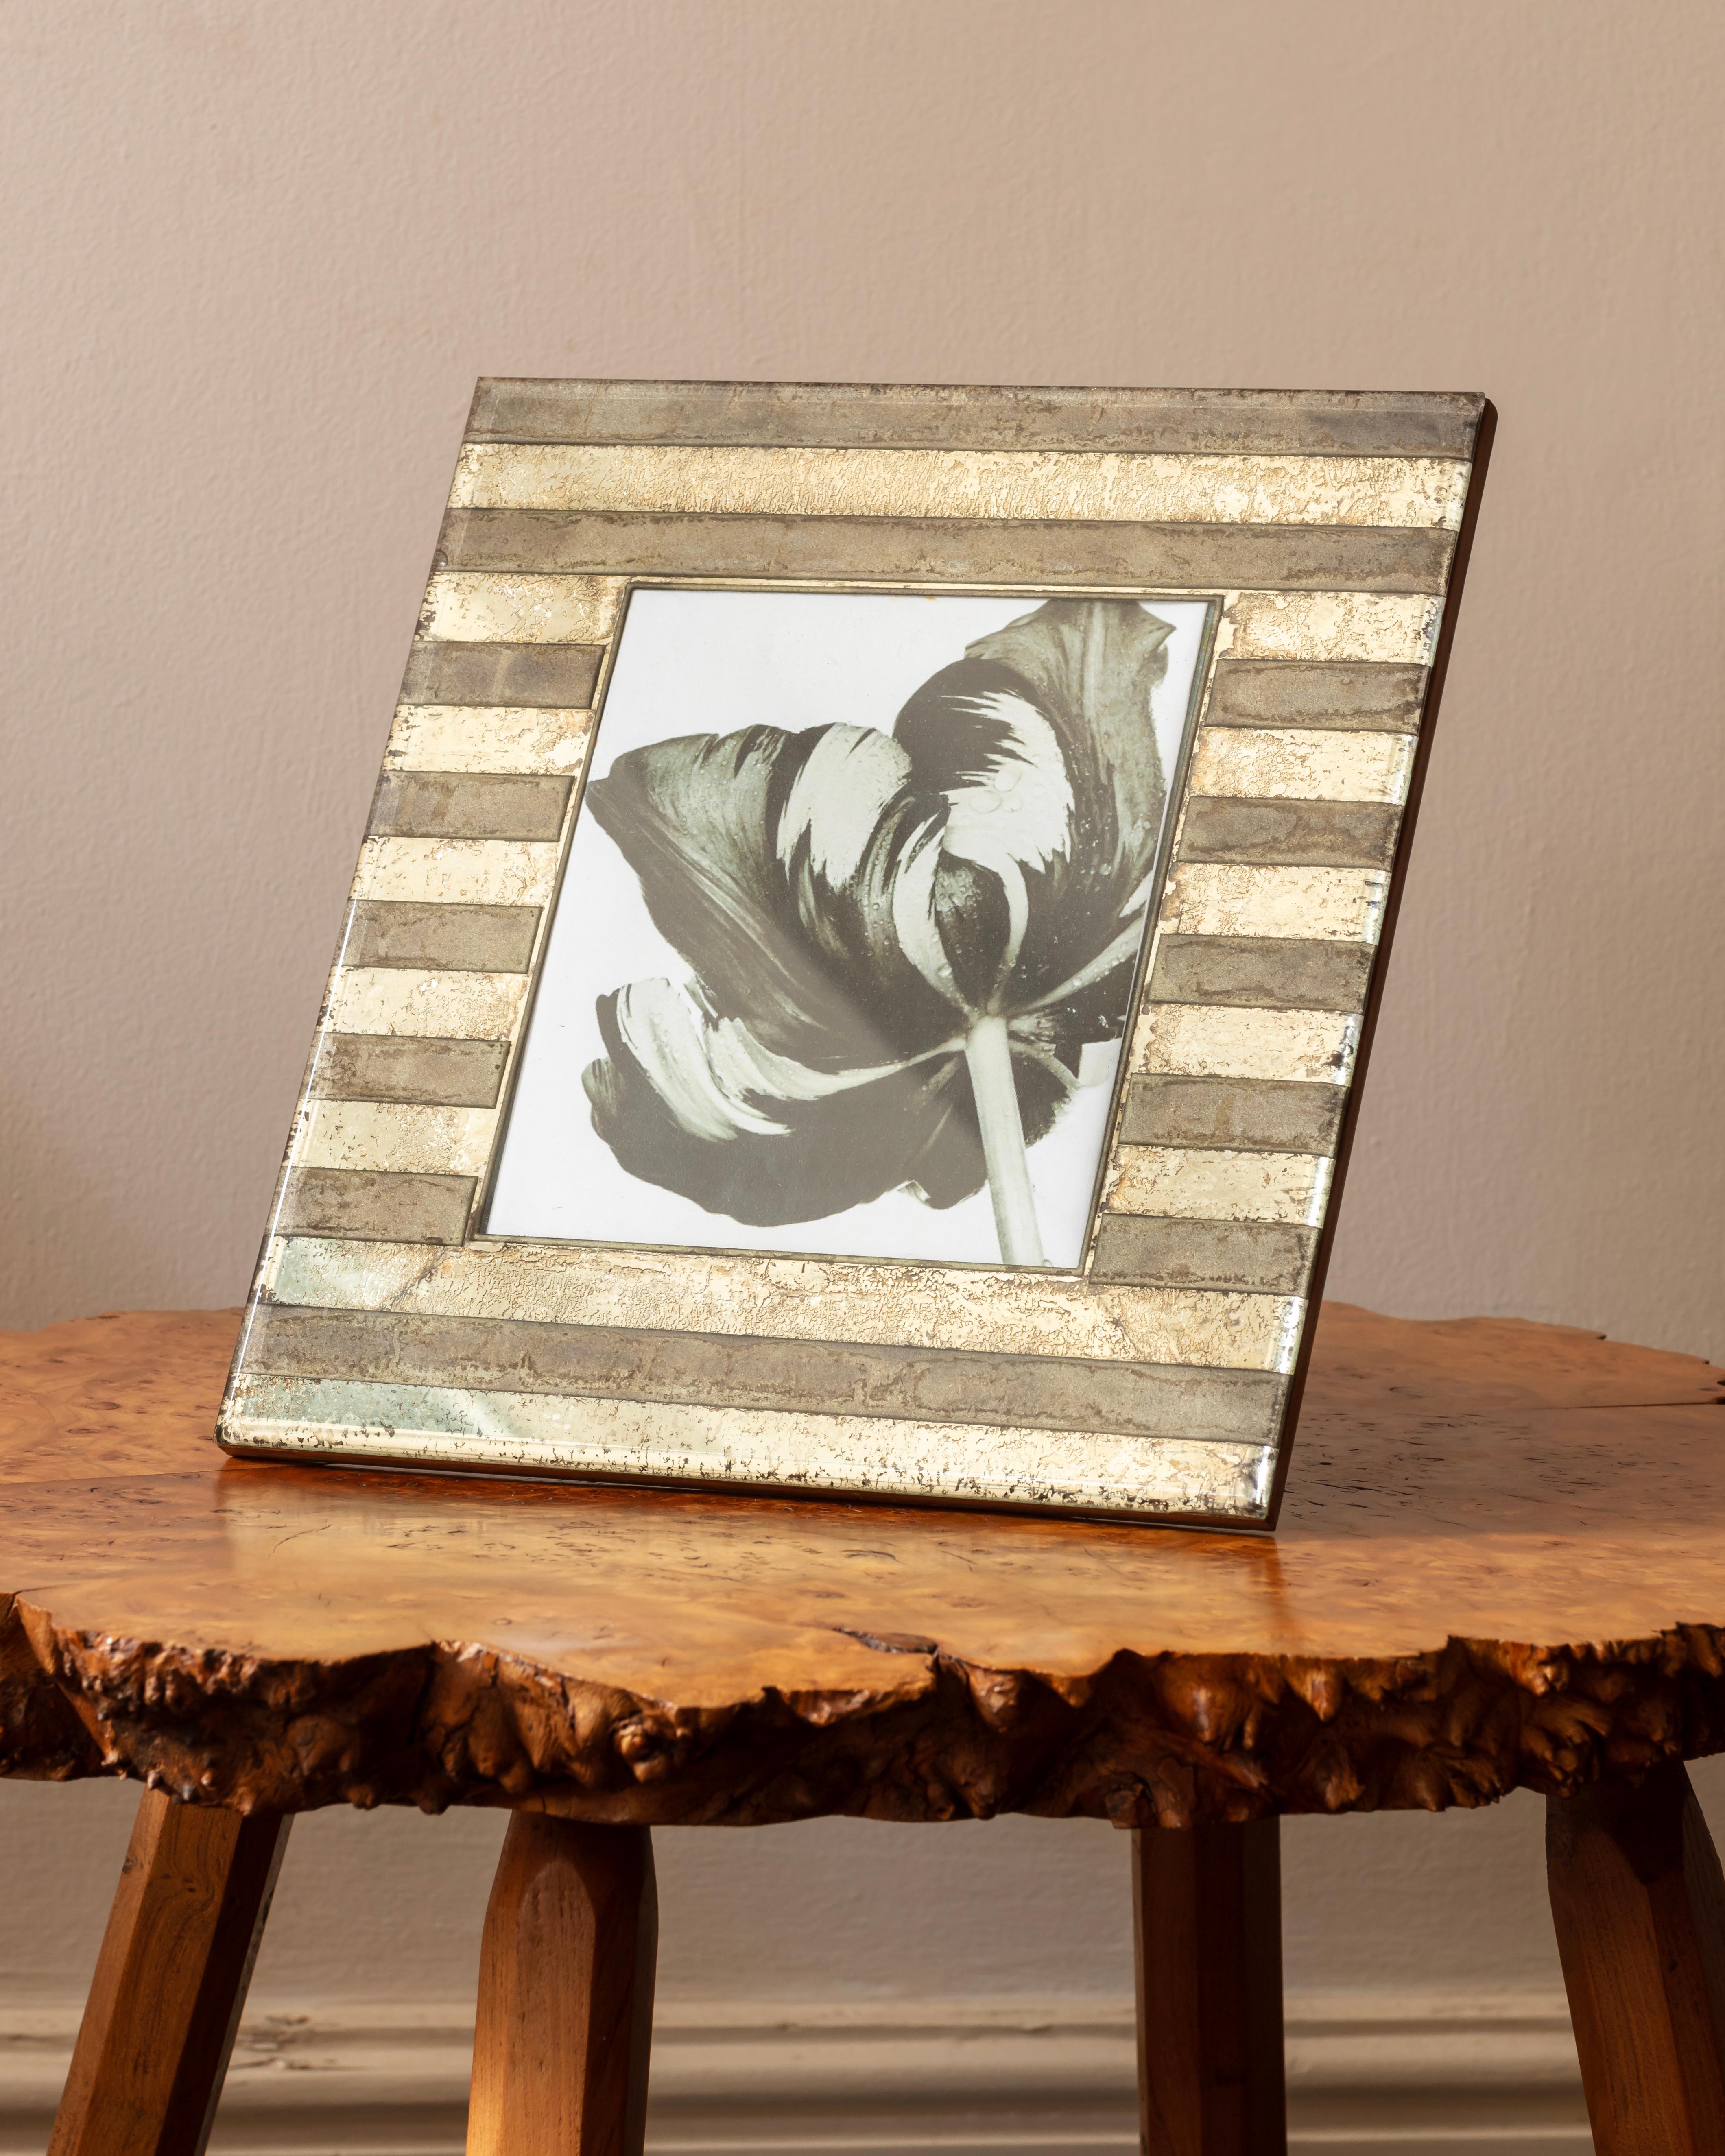 Photograph frame, stripes of distressed mirror mounted on sycamore.
Italian 1940s 
Dimensions: H:29cm x W:31cm